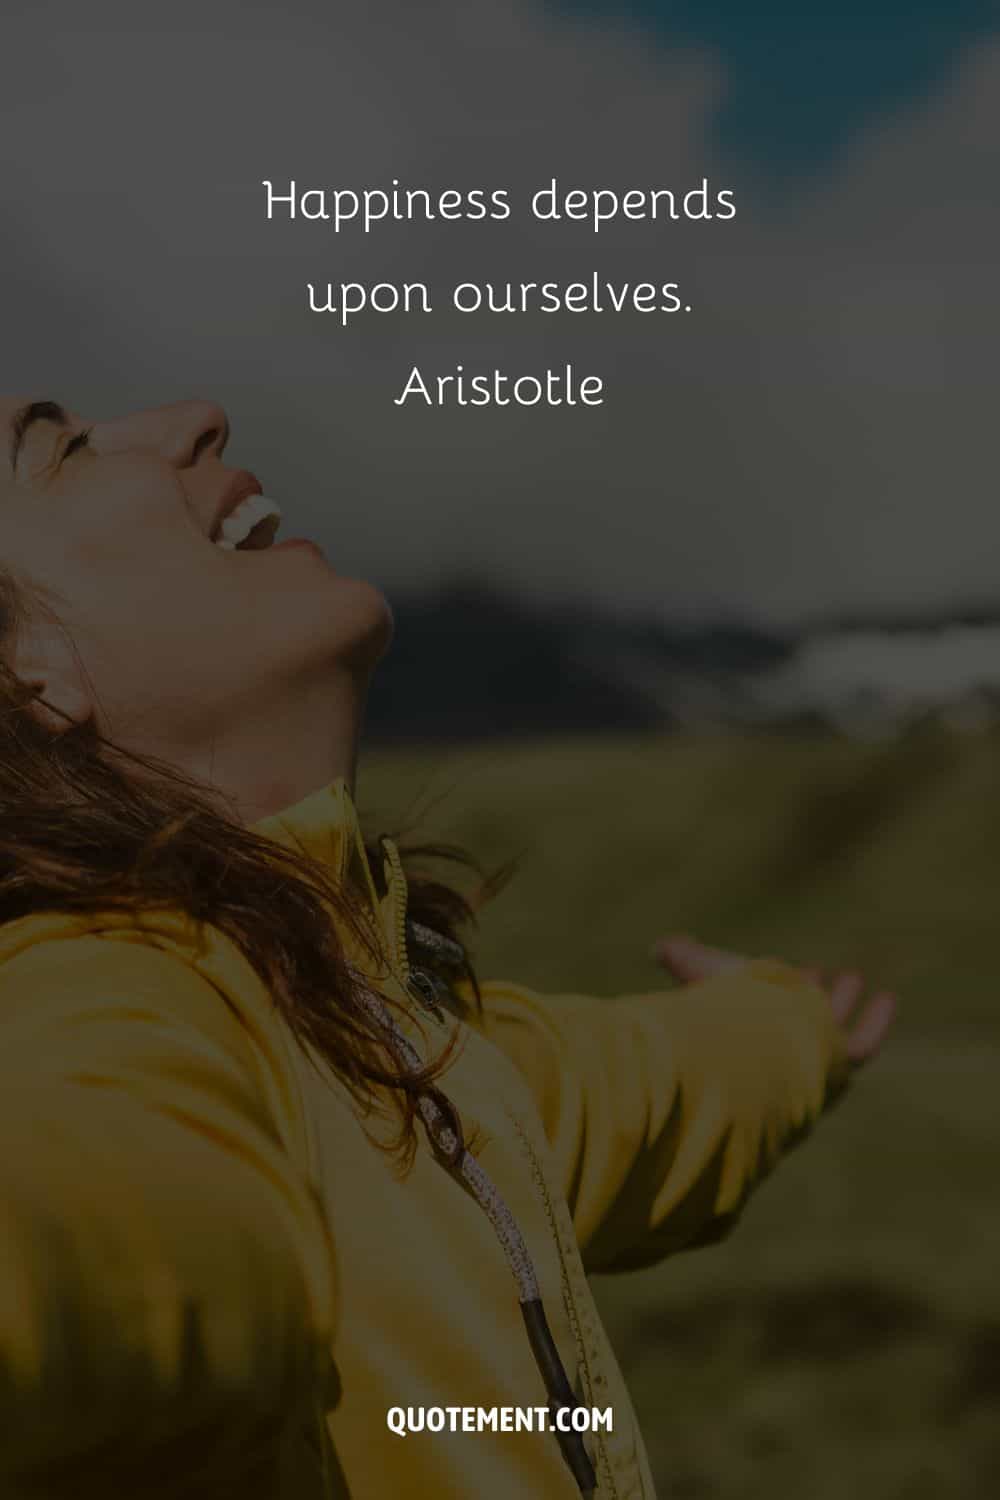 Happiness depends upon ourselves. – Aristotle.